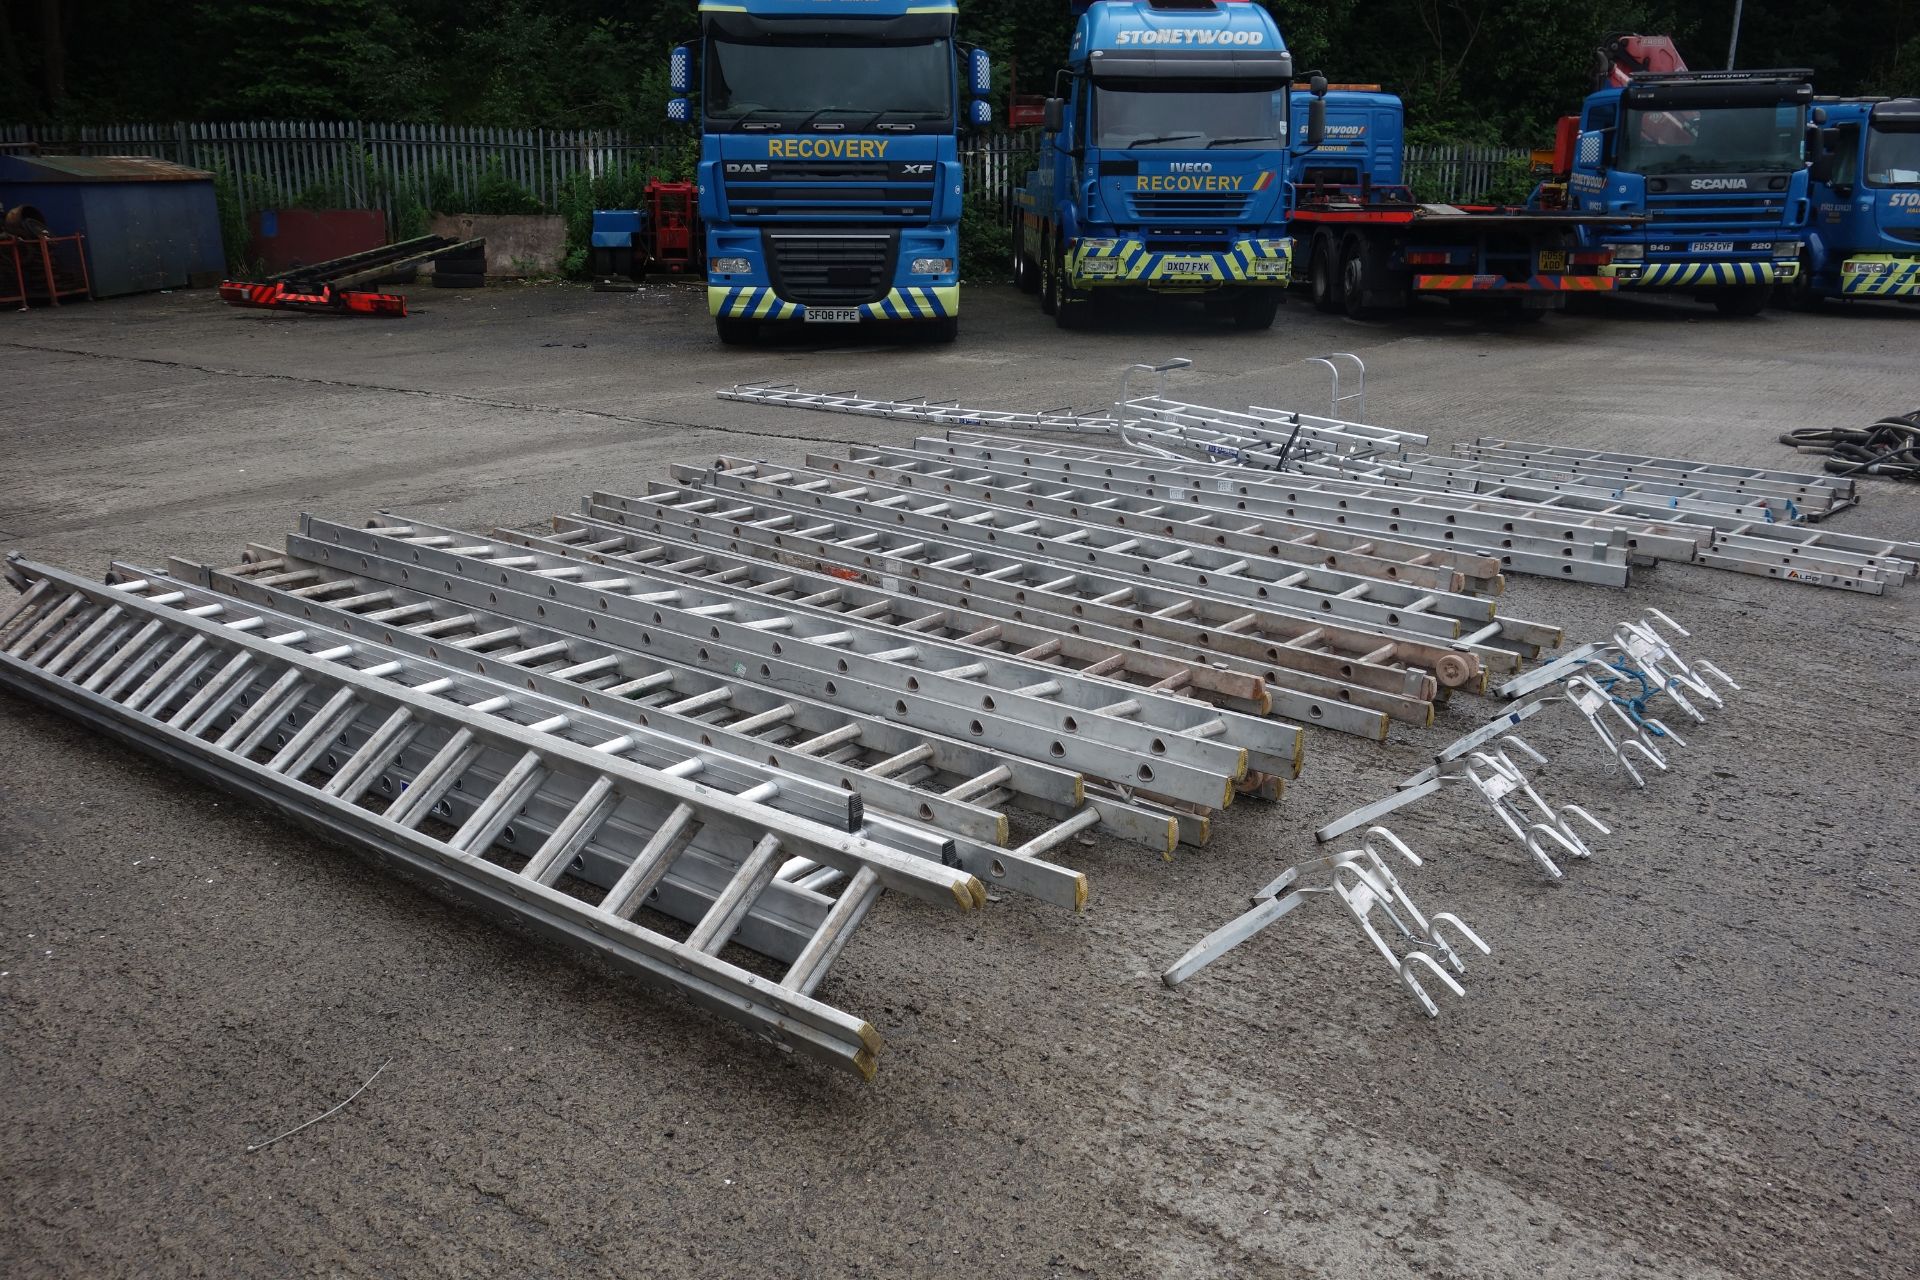 15 ladders as lotted: Four x 4m double extension ladders with wheels (each ladder making 8m in